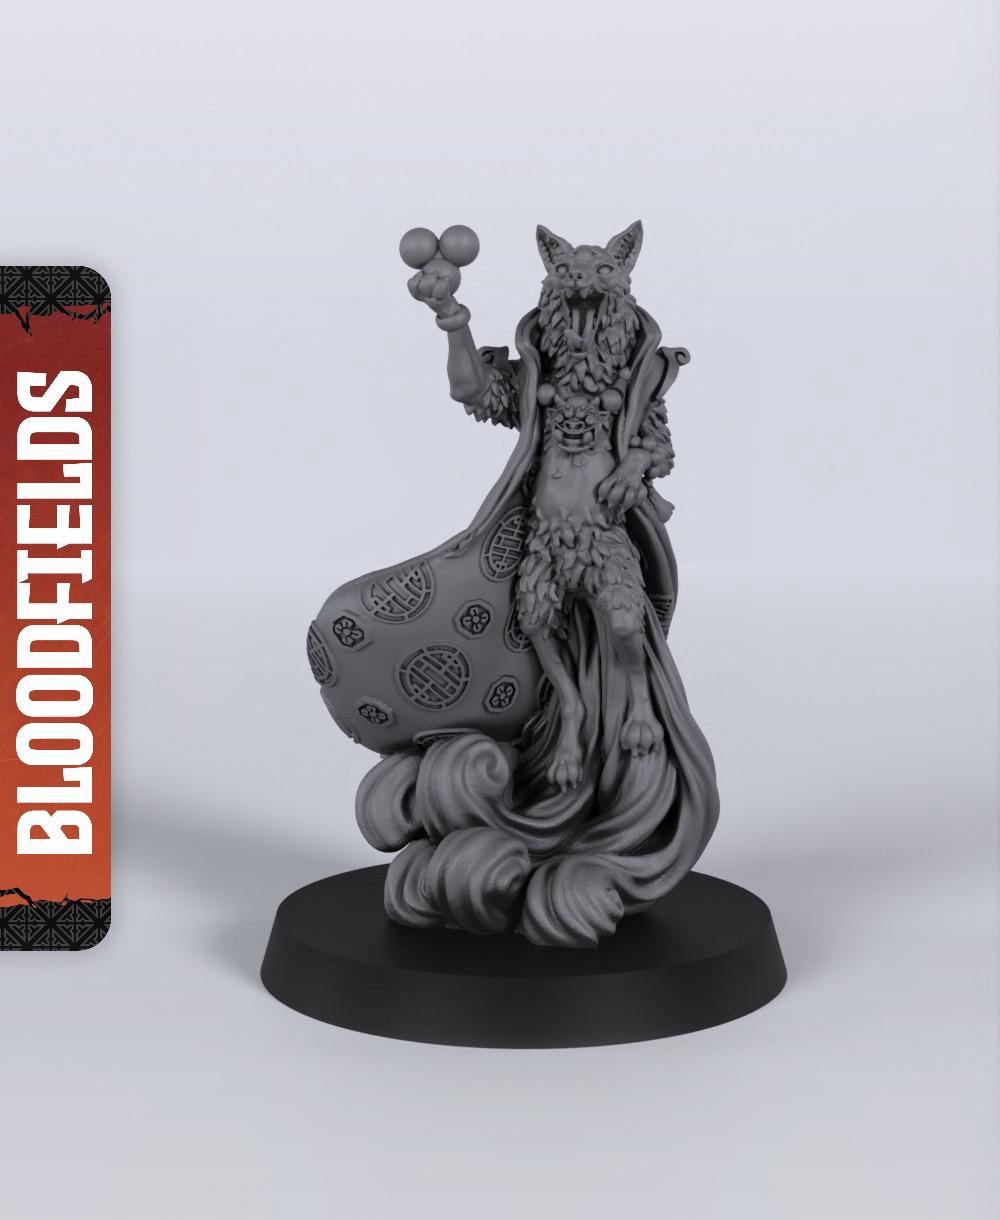 Kitsune - With Free Dragon Warhammer - 5e DnD Inspired for RPG and Wargamers 3d model